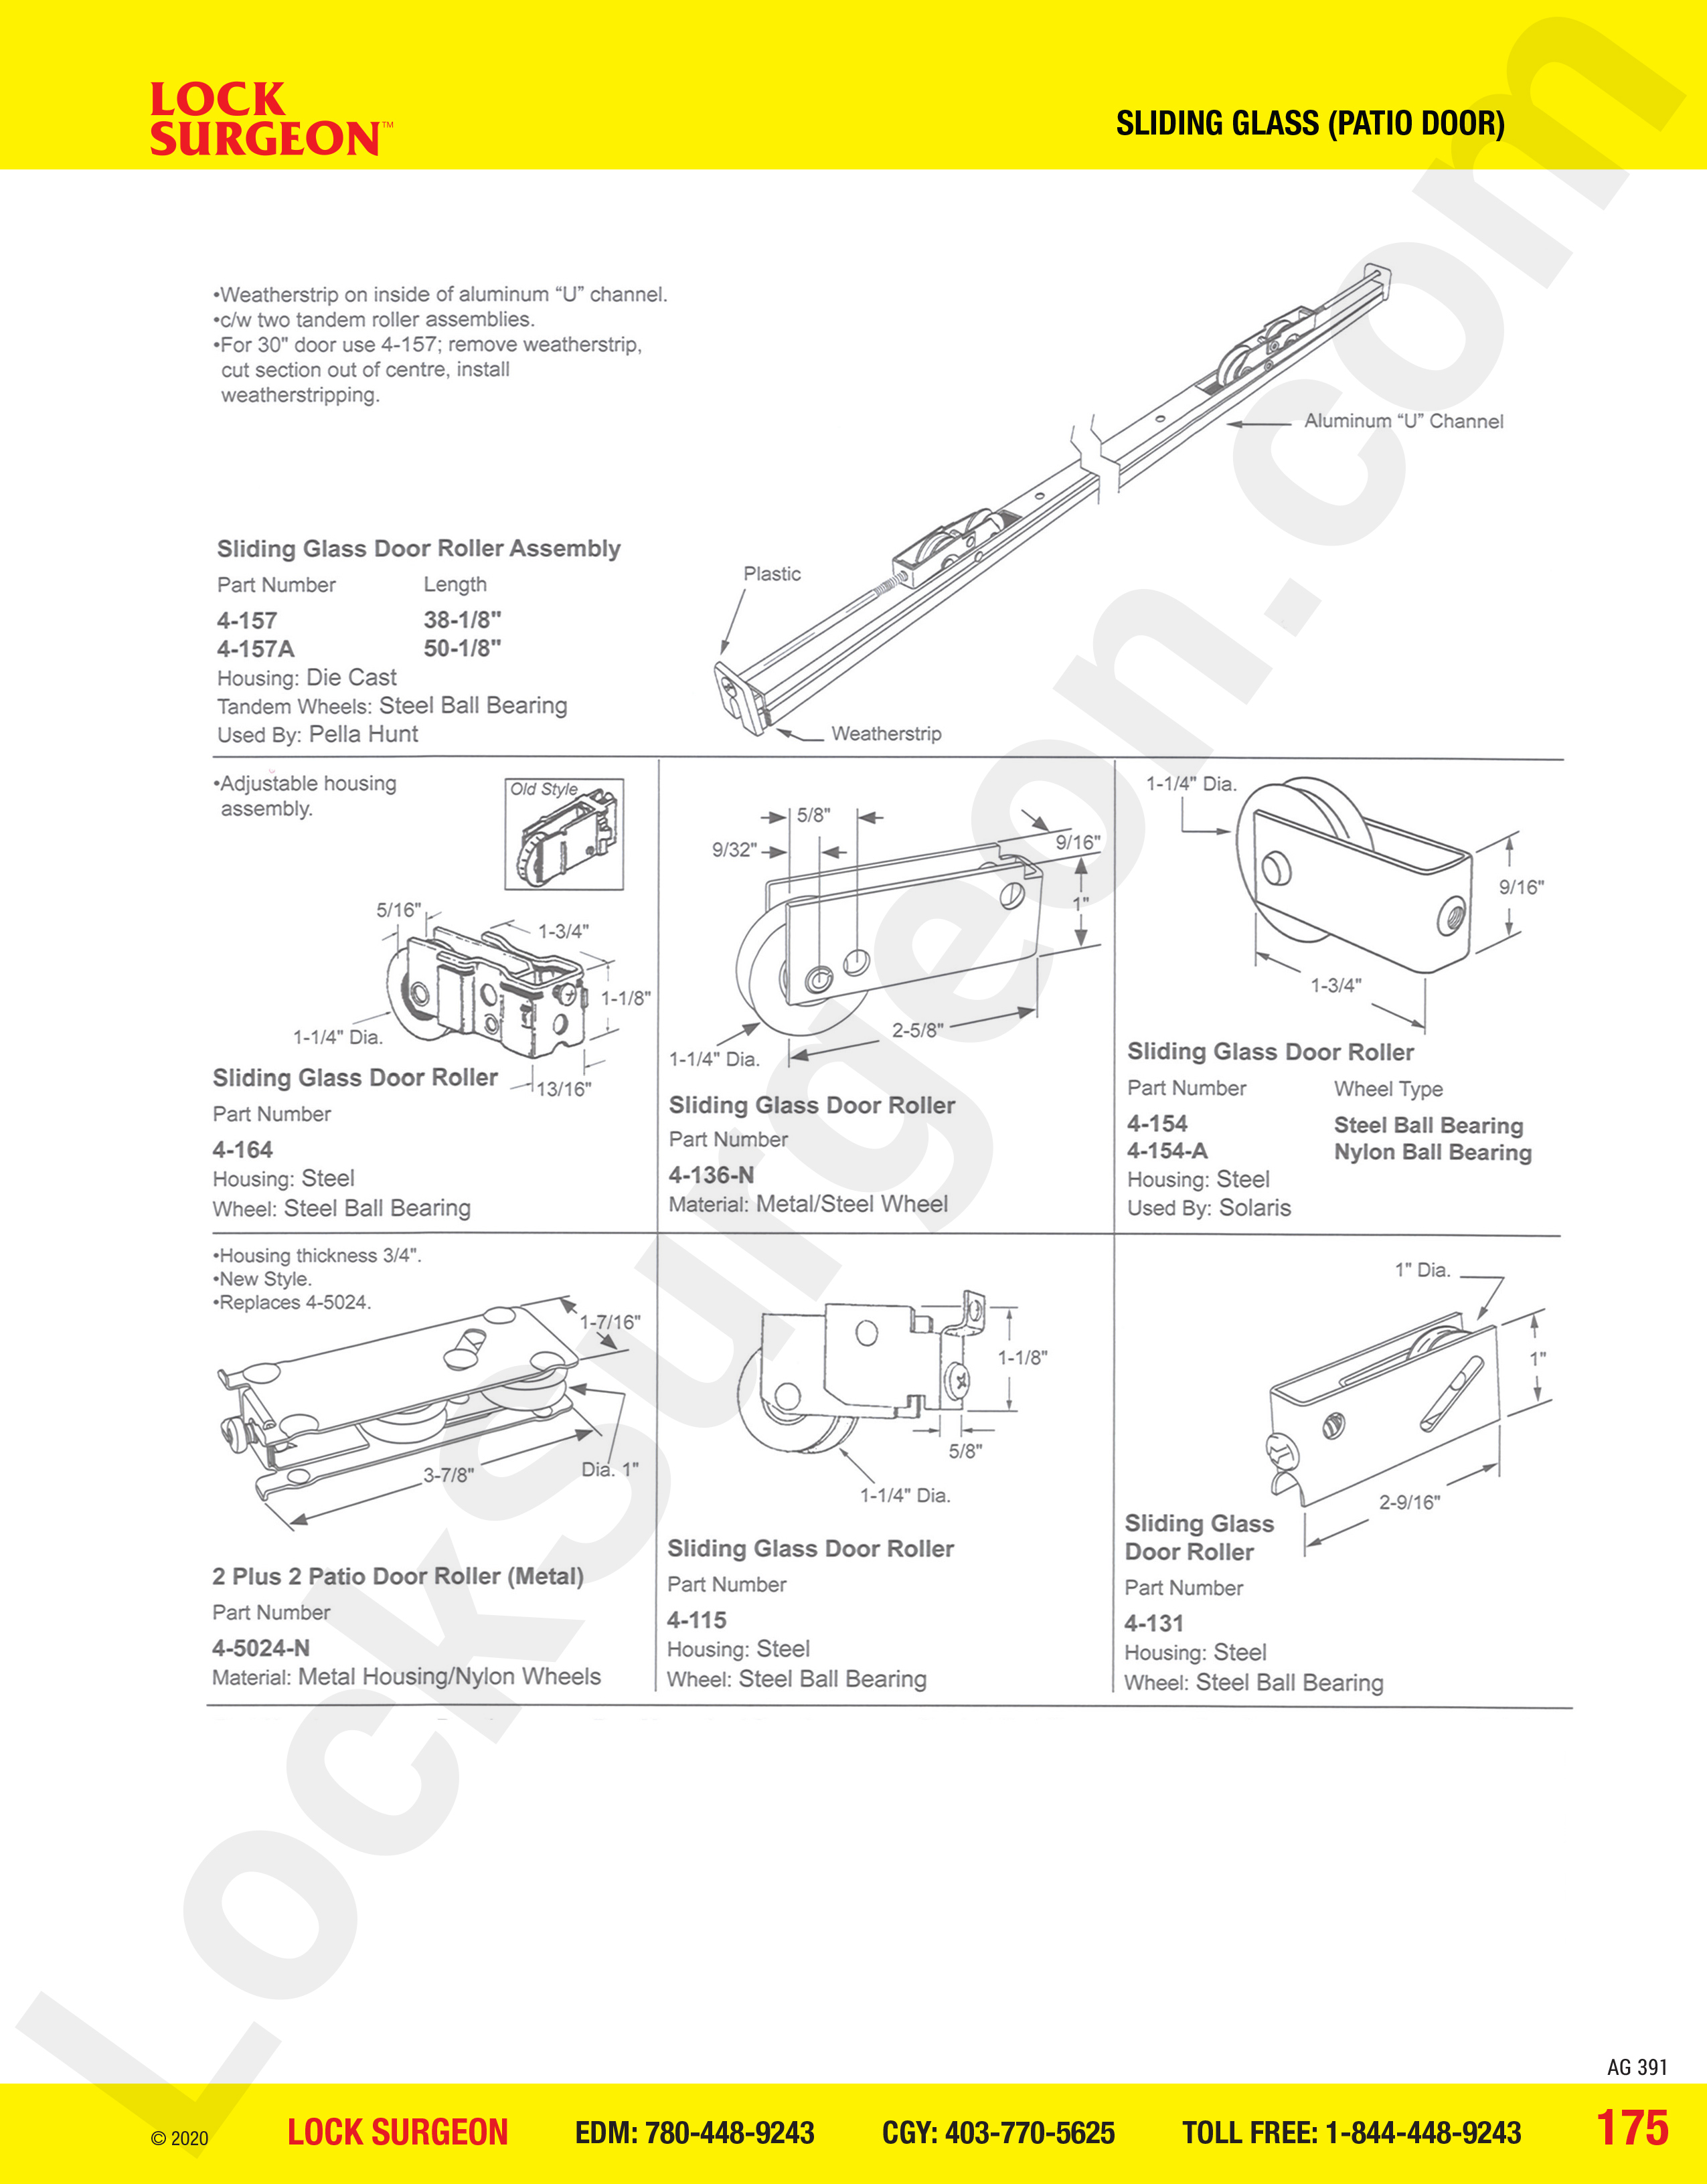 Sliding Glass and Patio Door sliding glass door roller and assembly